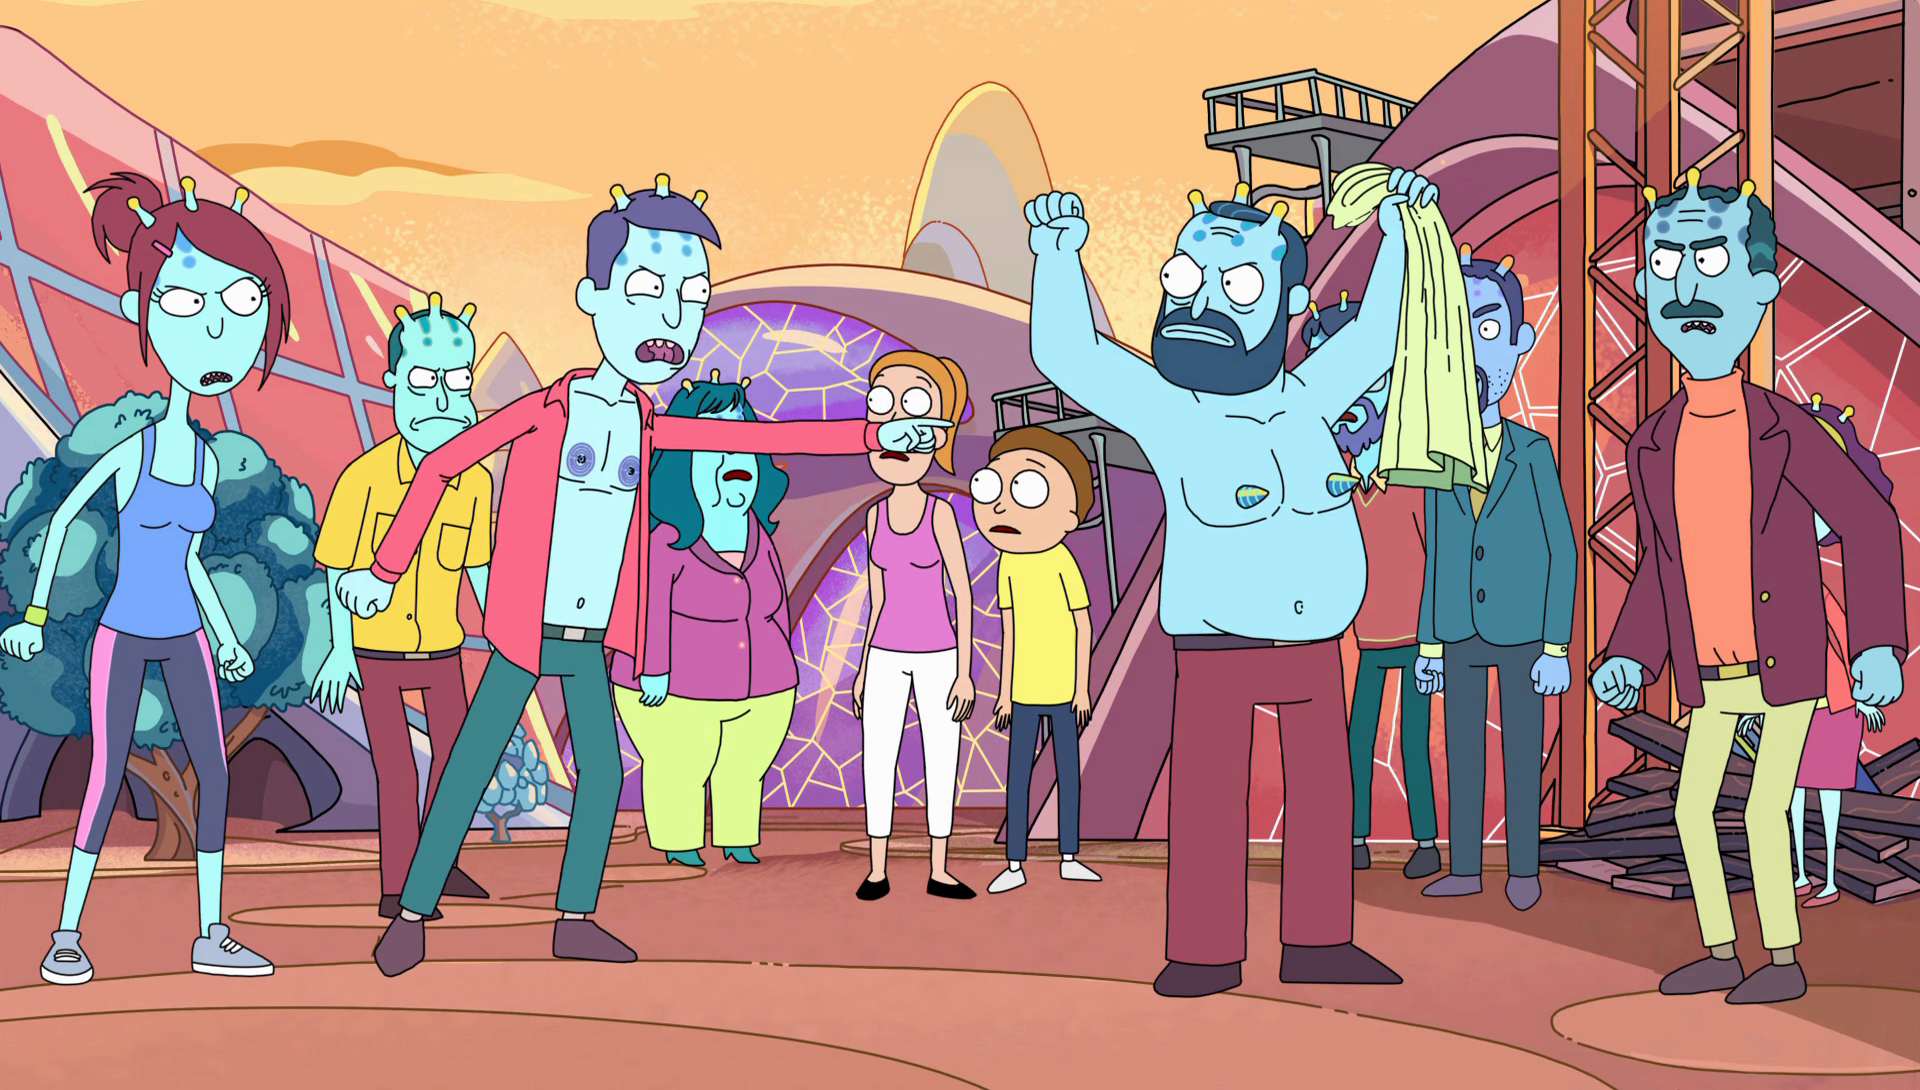 According to The Art of Rick and Morty, most of these aliens were already b...